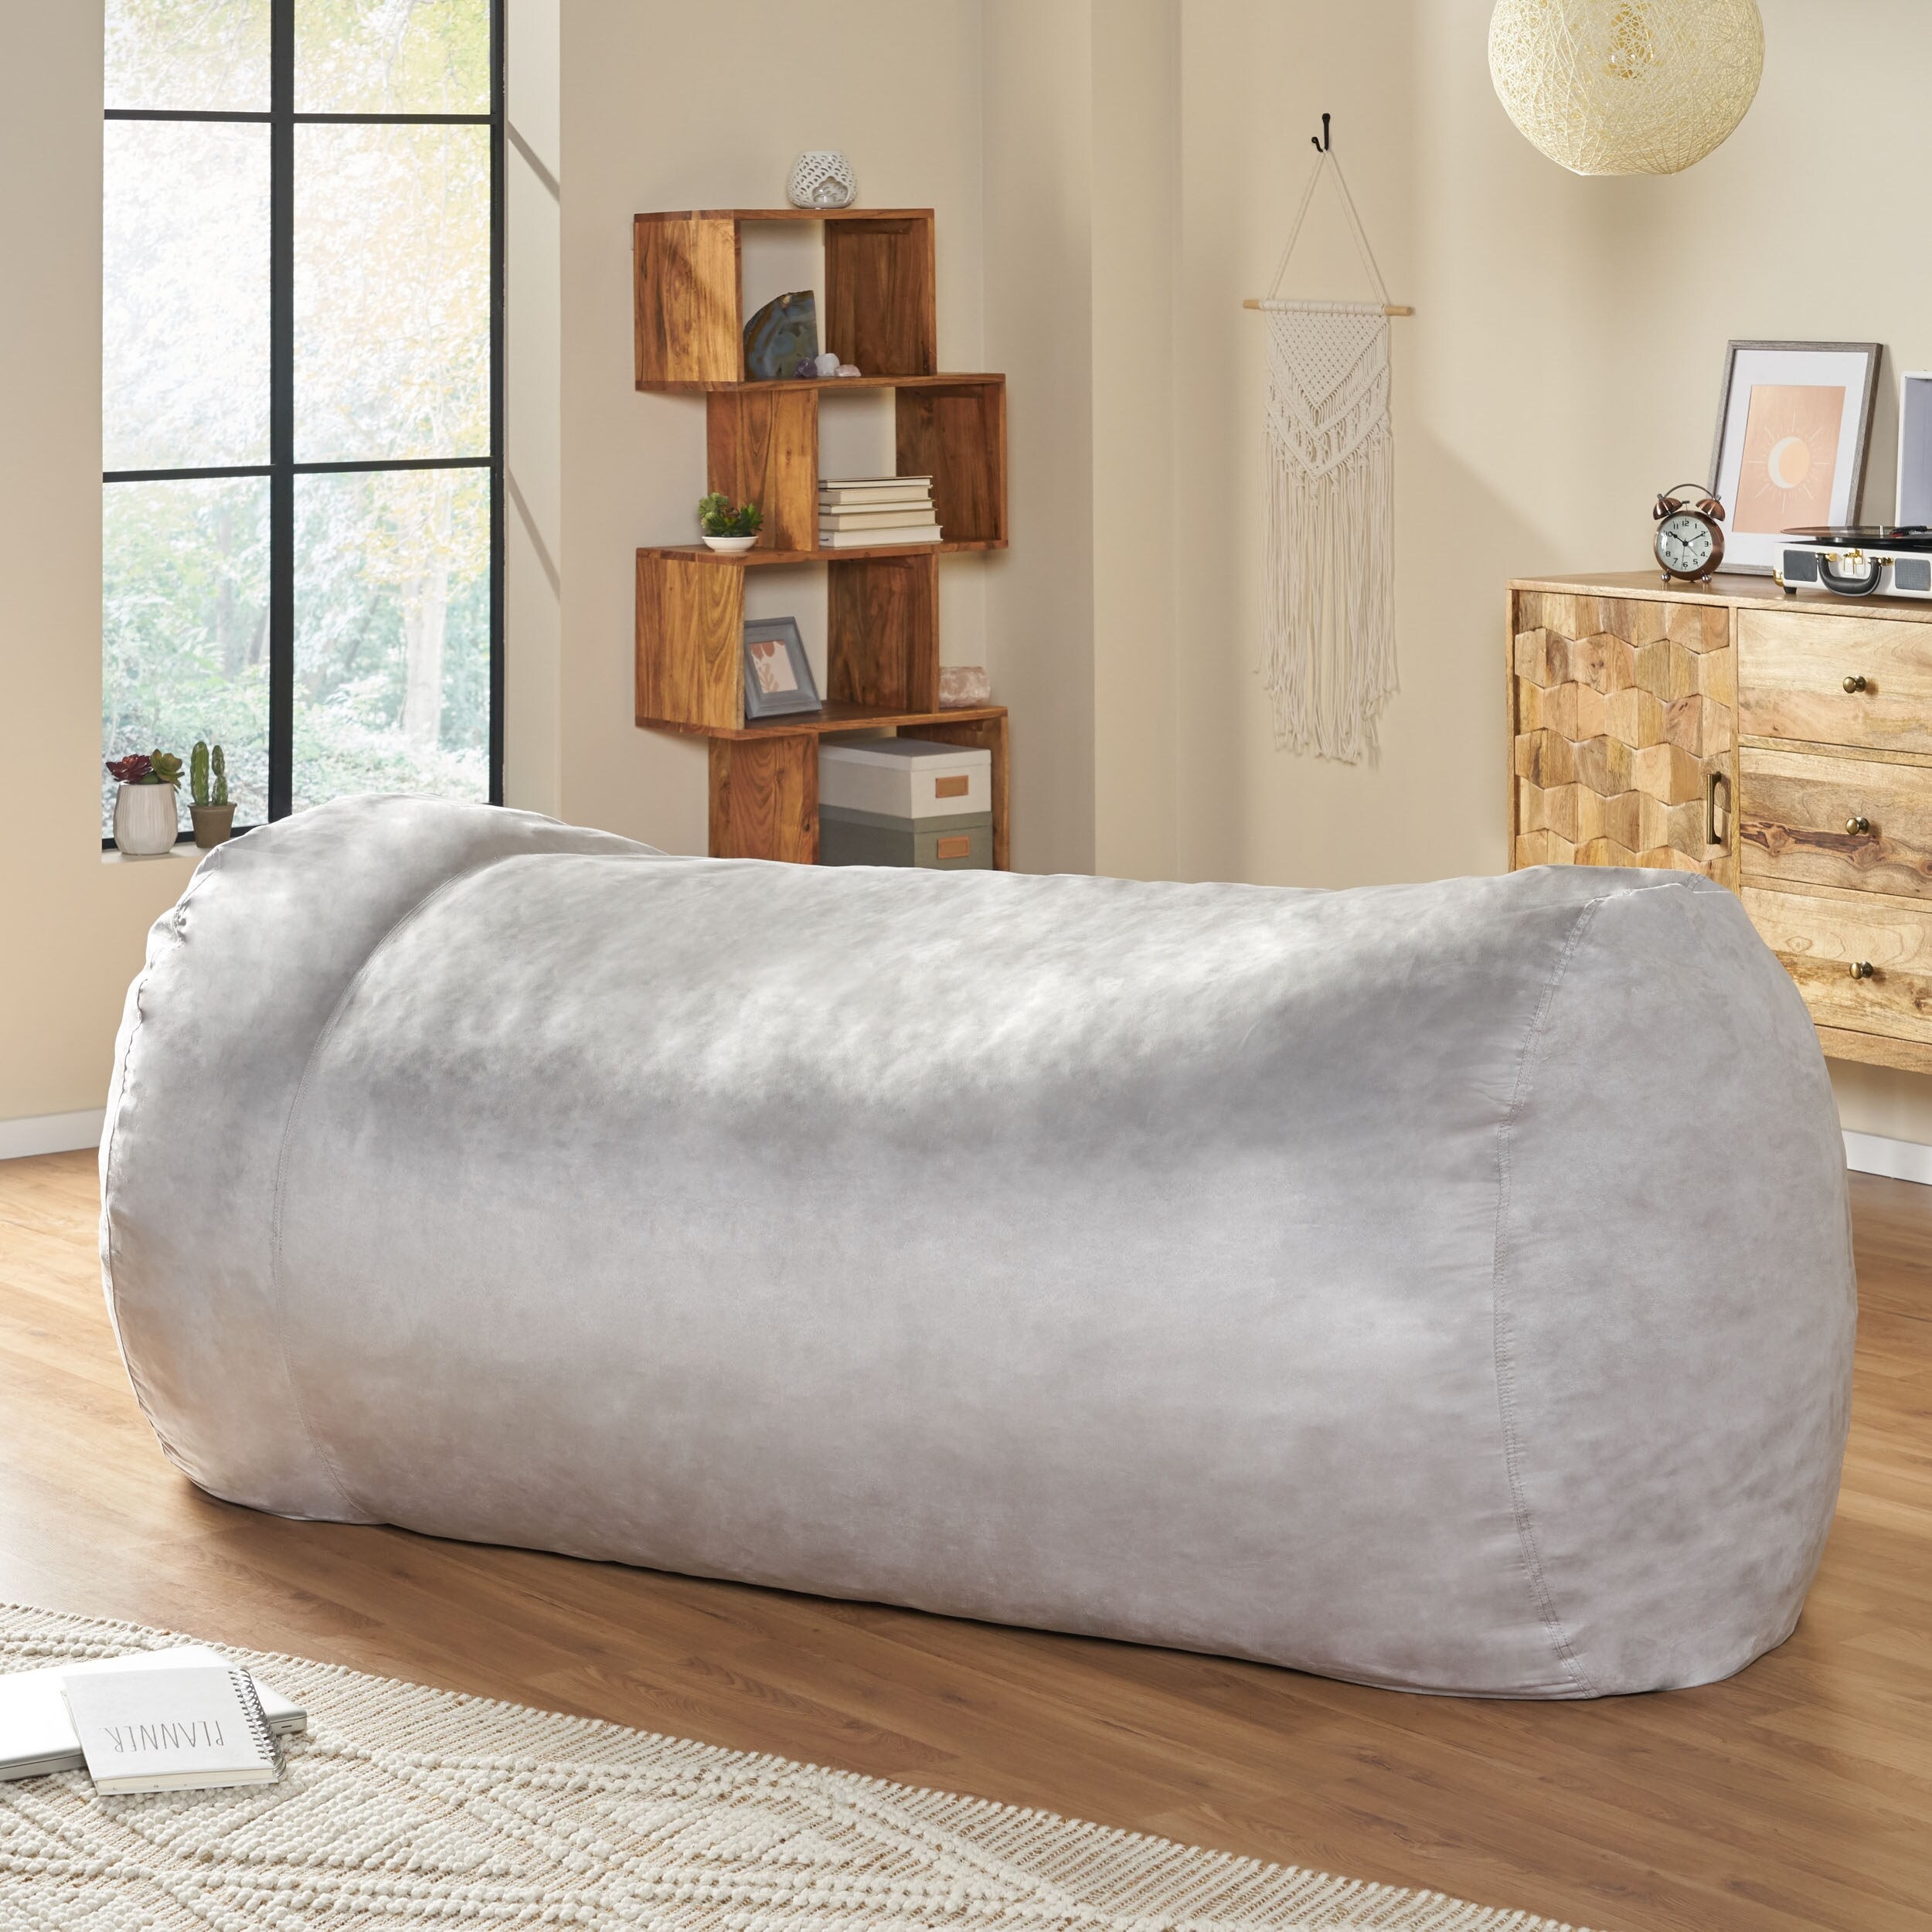 Larson 8-foot Lounge Beanbag Chair by Christopher Knight Home